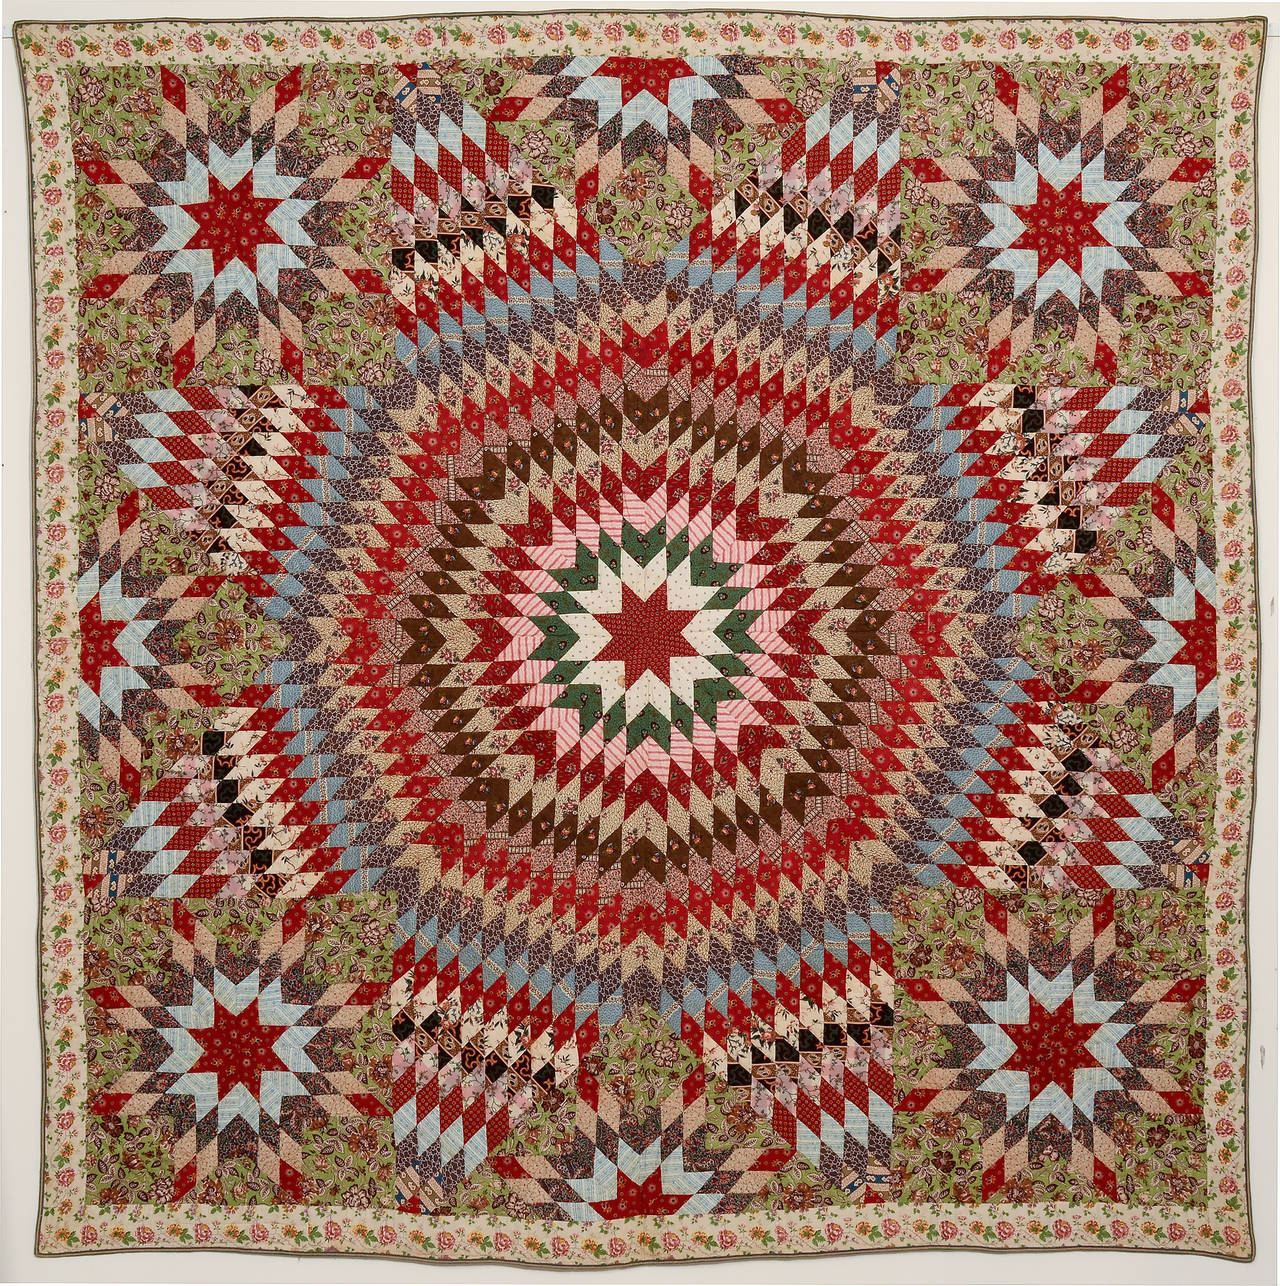 The bold use of both pattern and fabric make this starburst quilt a real eye dazzler. The maker clearly was not afraid of combining patterned fabrics and she did it beautifully. Where possible, she took particular care to center the diamonds with